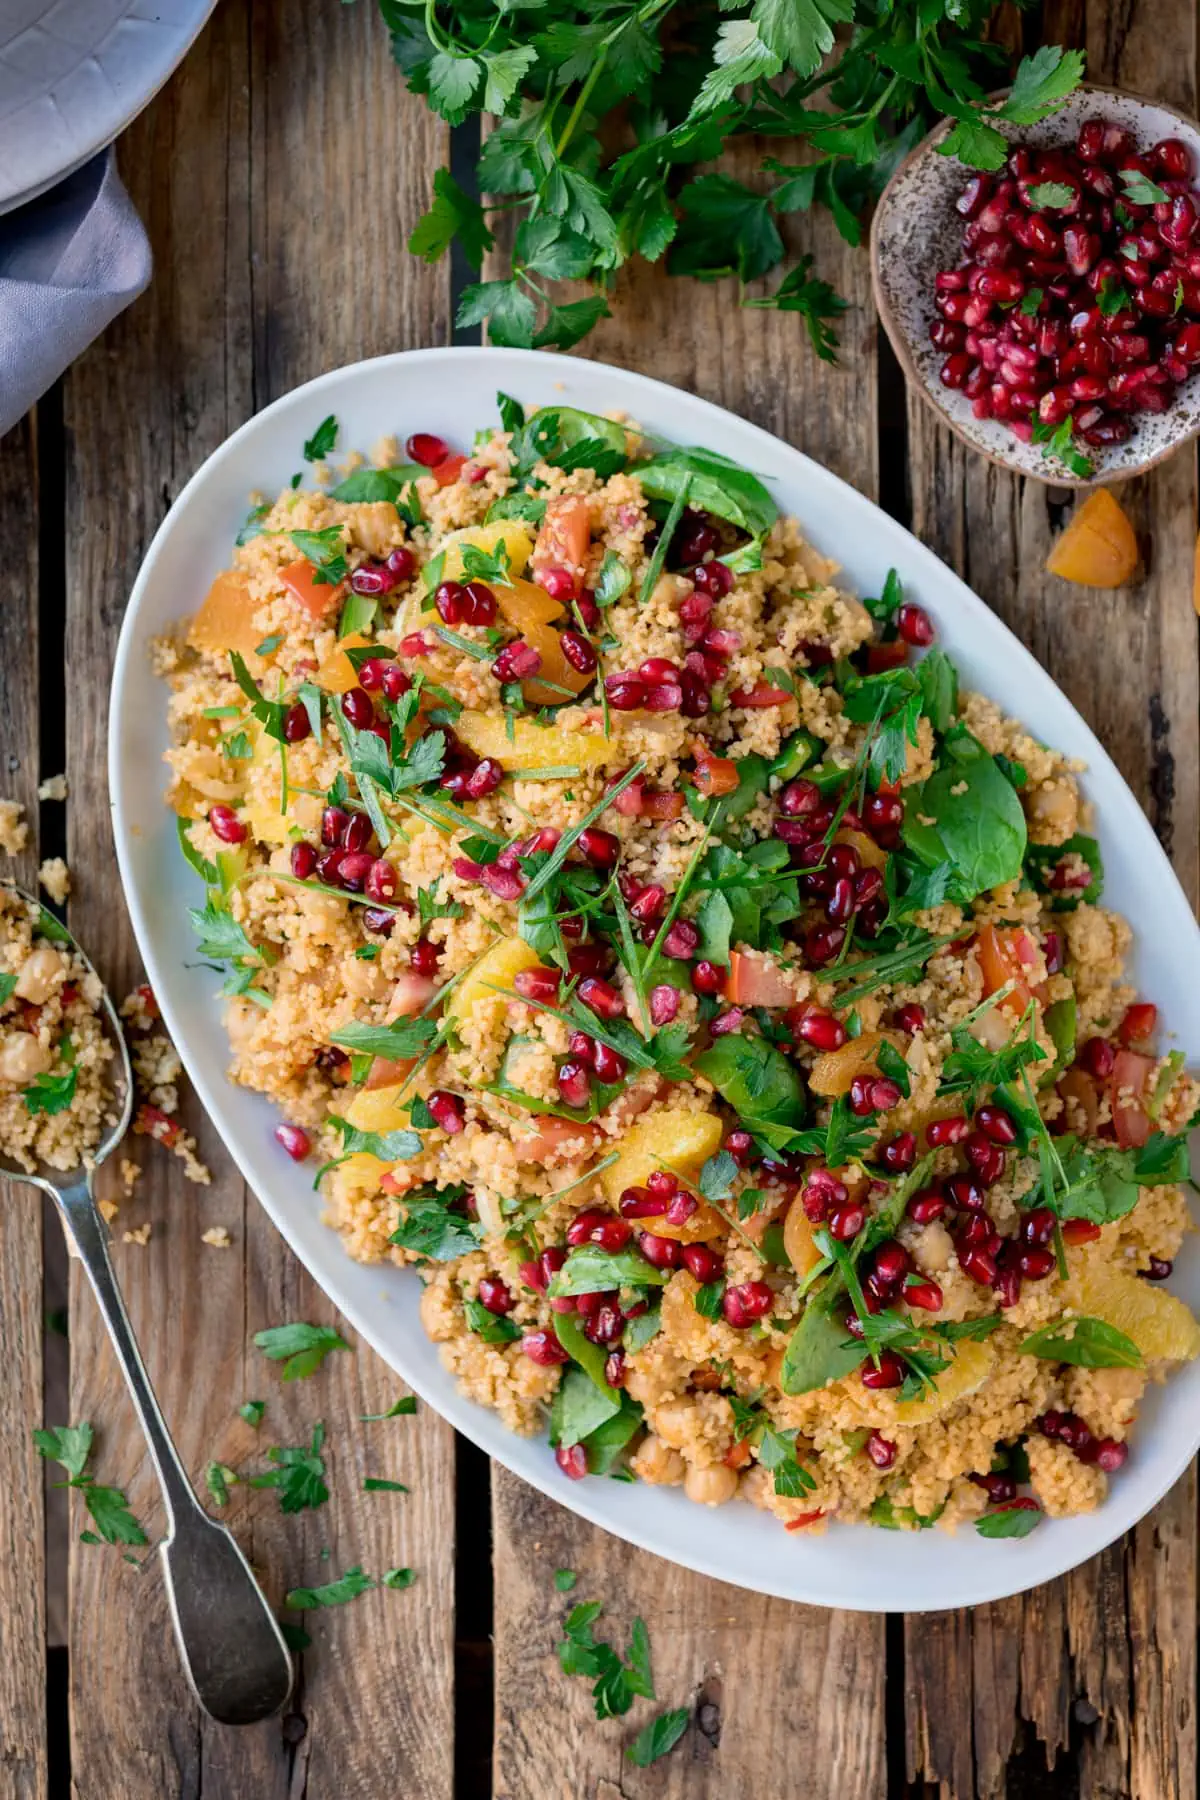 Top image of a large oval white plate filled with Moroccan-style couscous with oranges and pomegranates. The plate is on a wooden table, next to a spoonful of couscous, a plate of pomegranate, and fresh herbs scattered throughout.